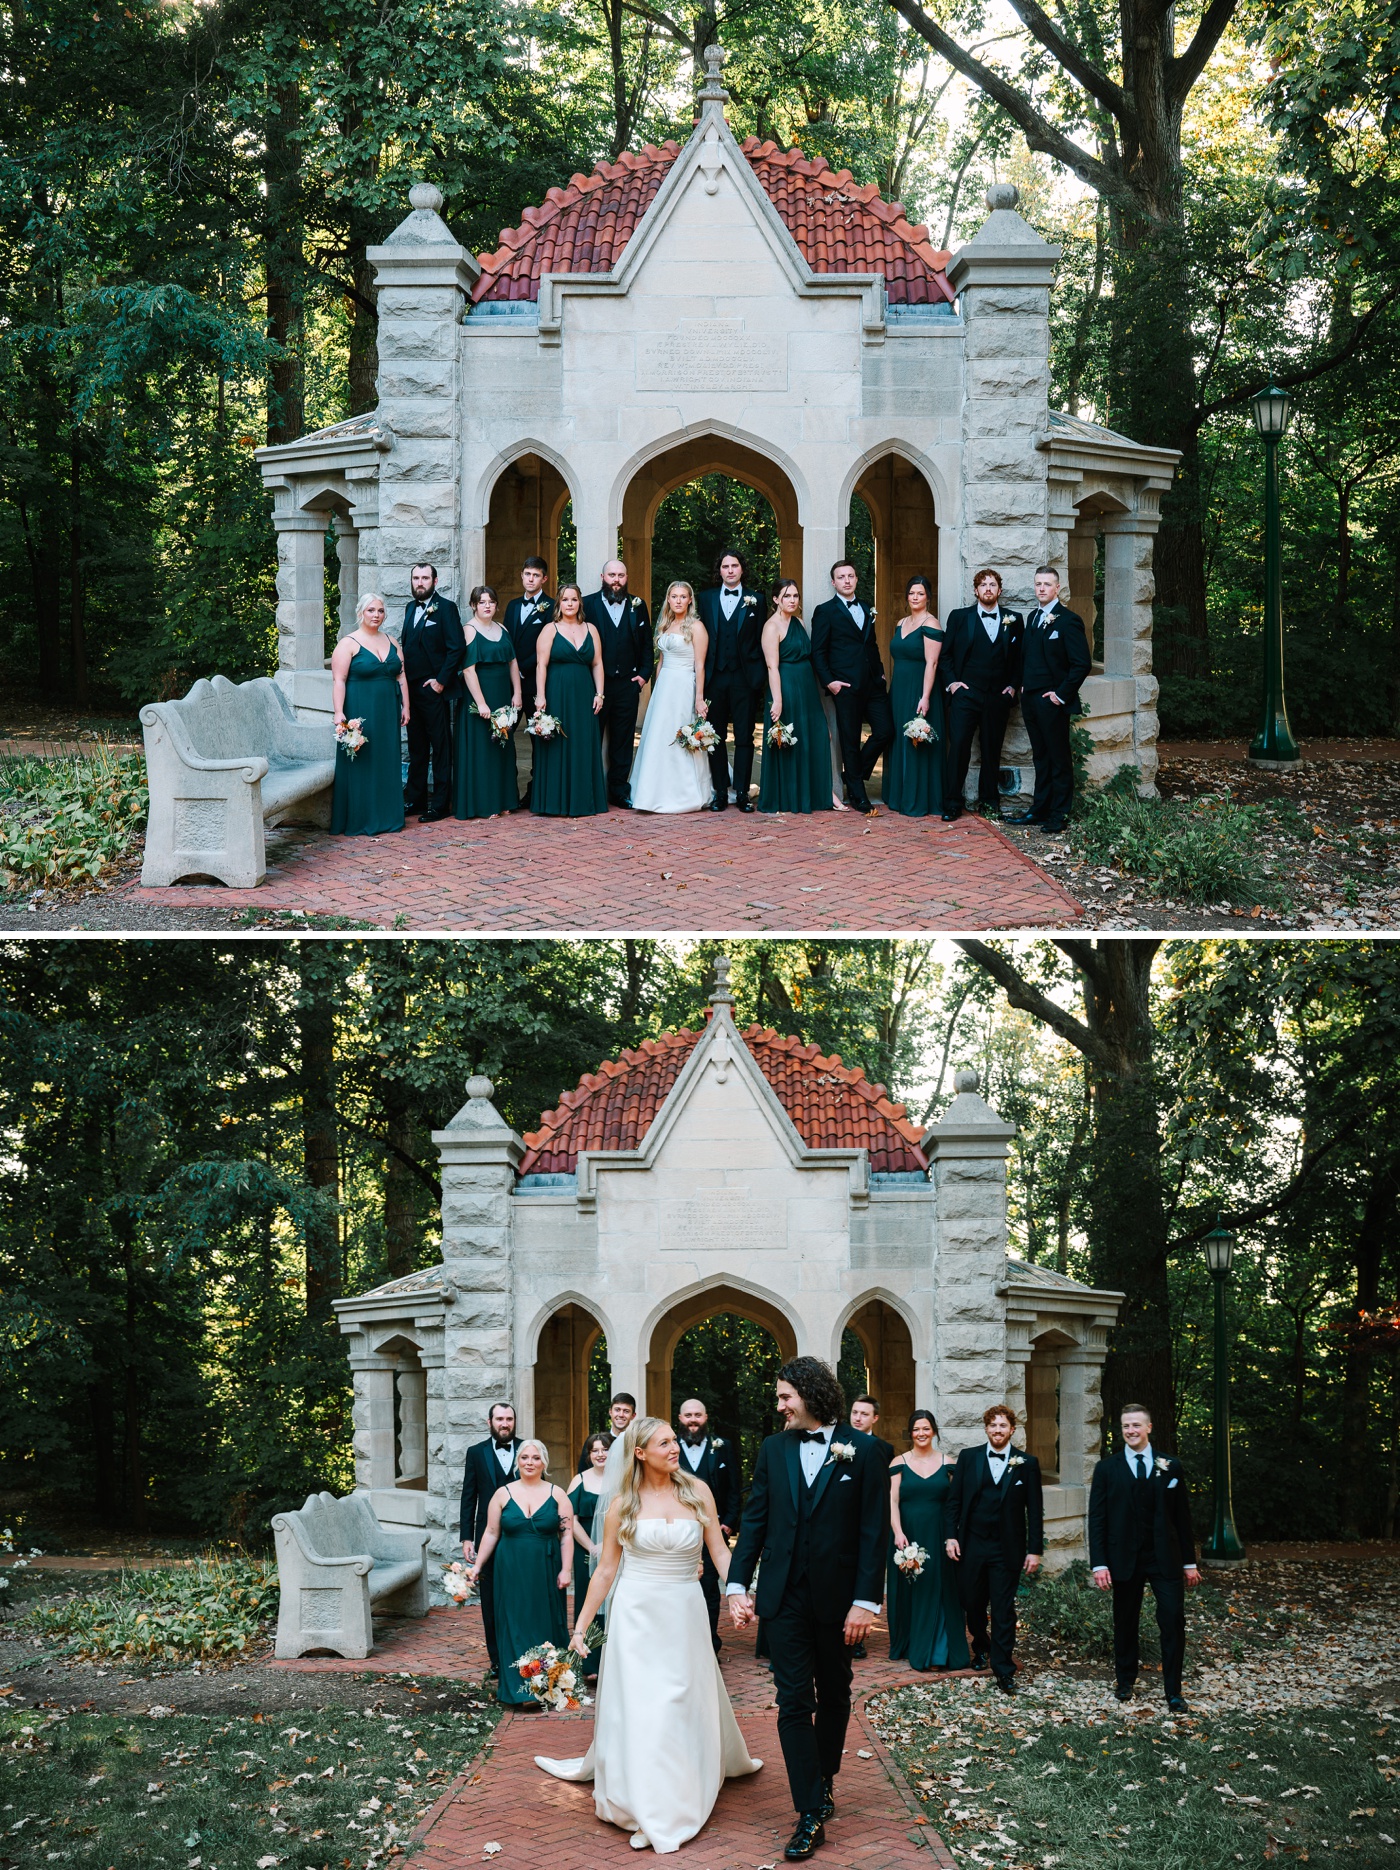 Bridal party portraits on the Indiana University Bloomington campus